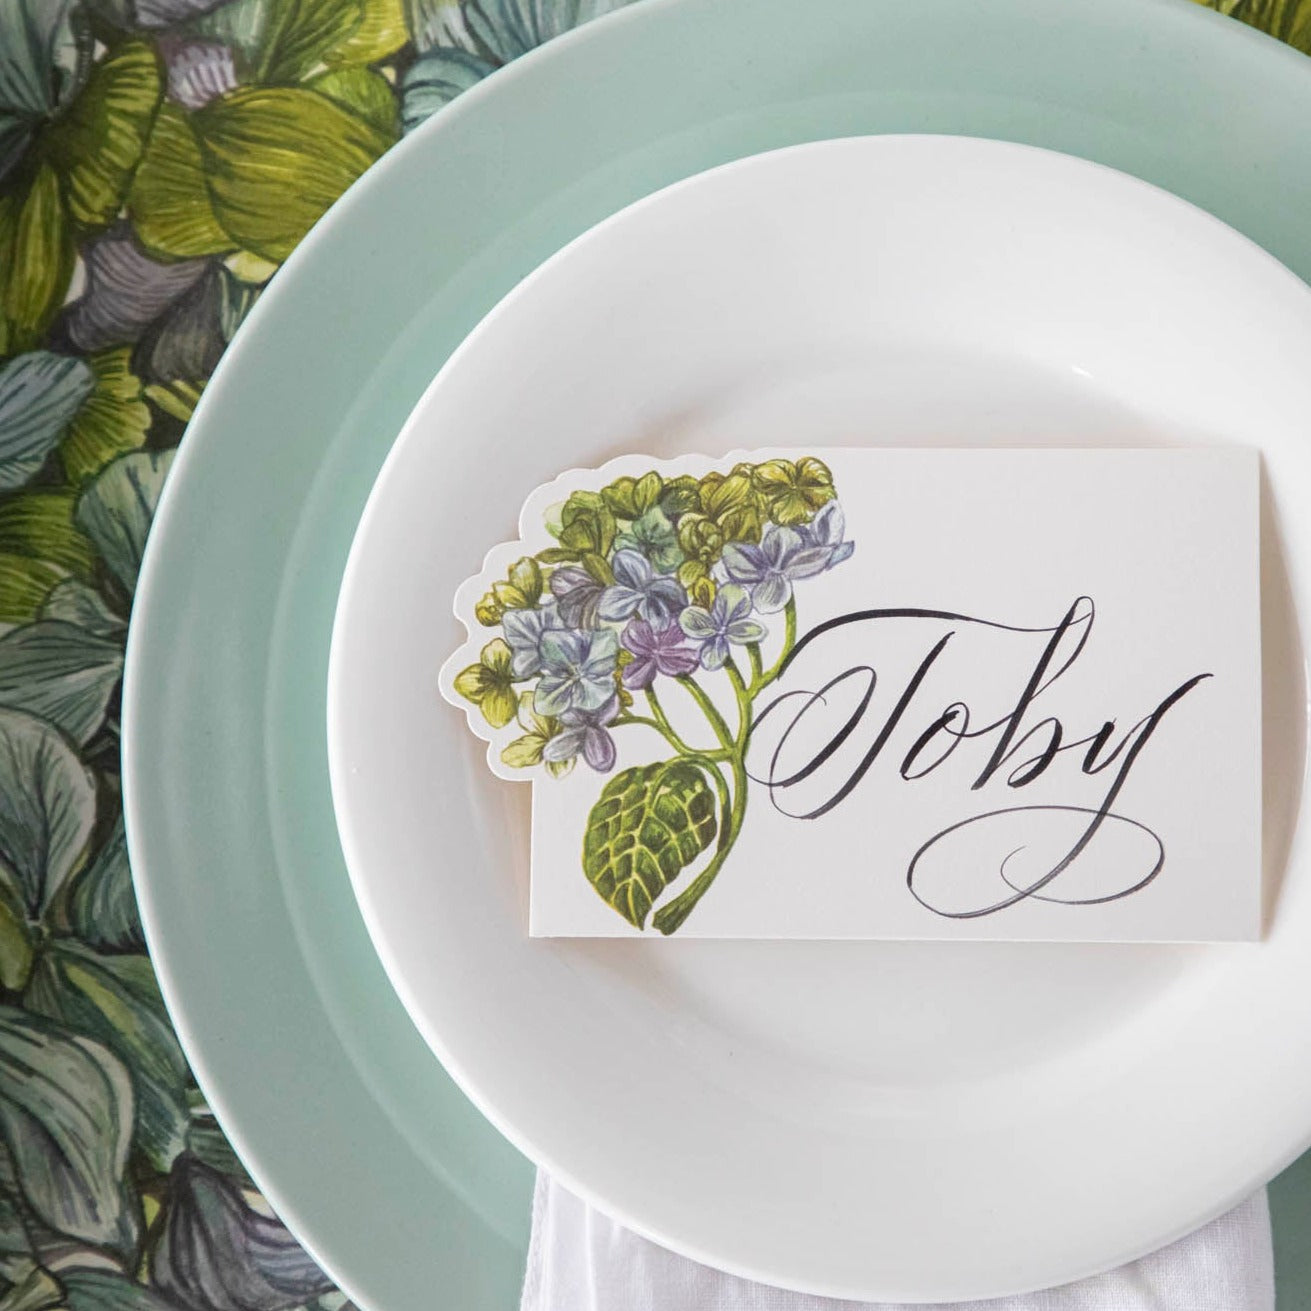 Hester &amp; Cook Hydrangea place cards adorned with multicolored blooms placed on a plate.